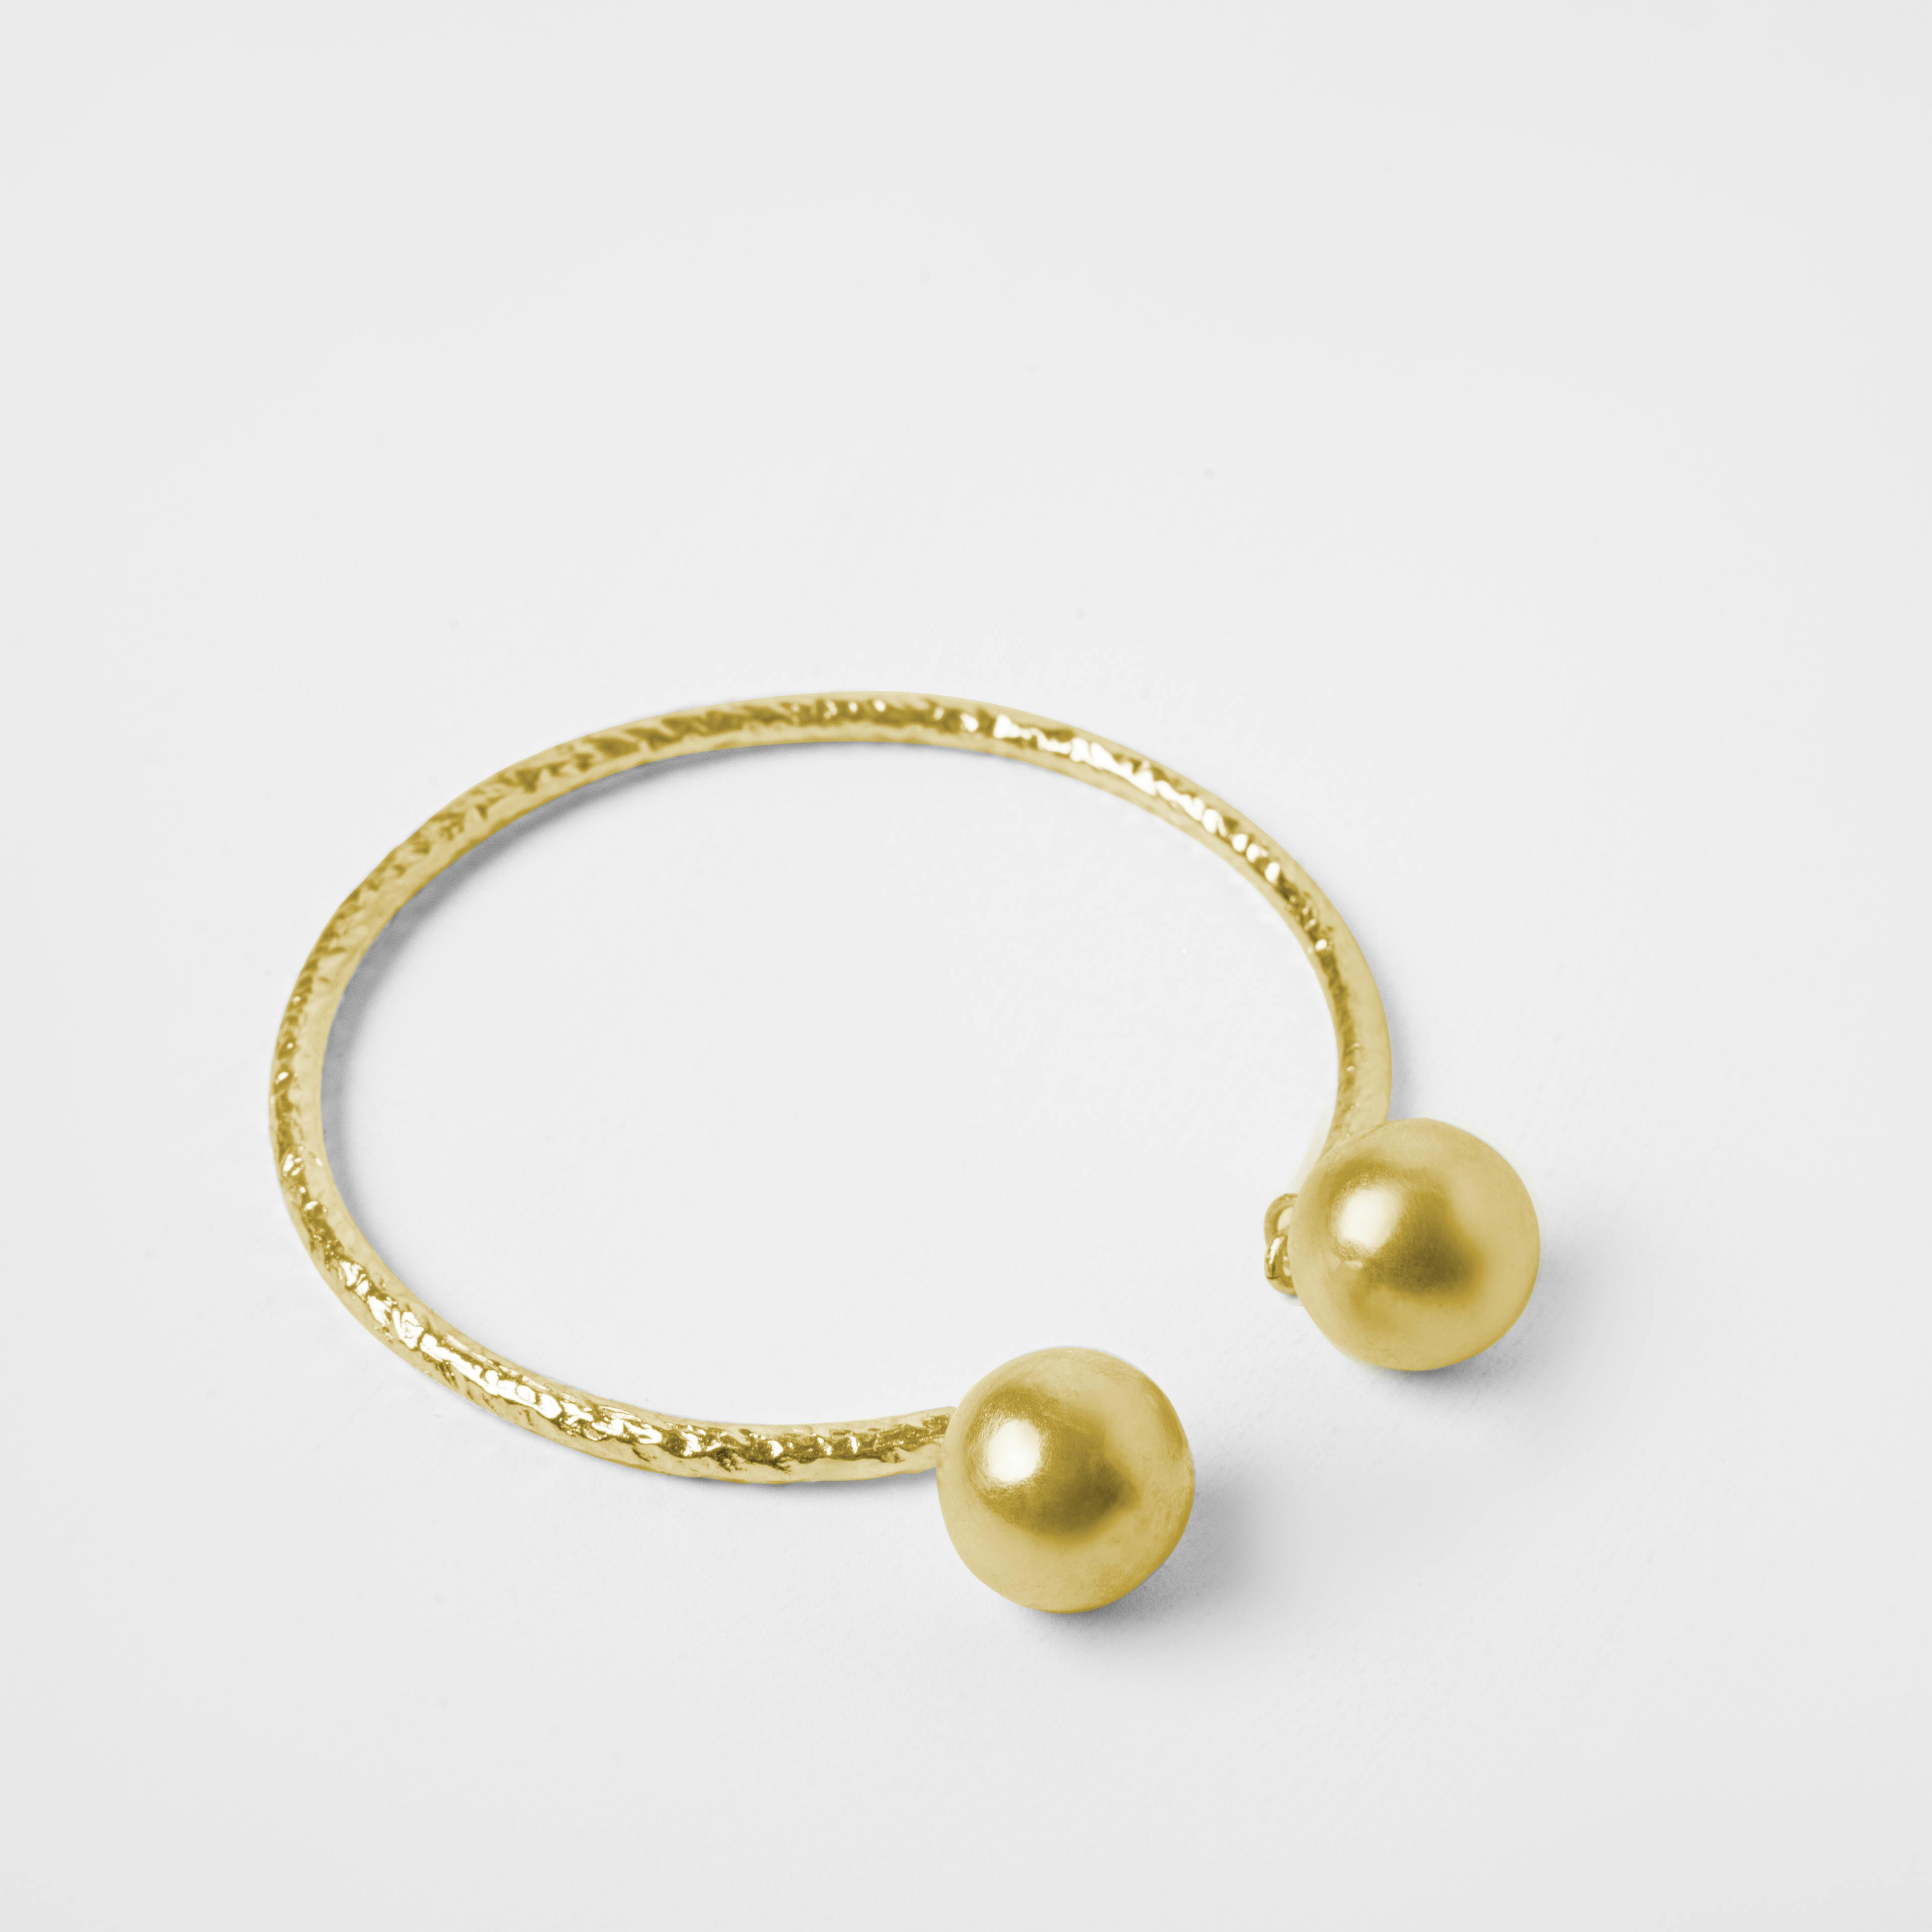 DUALDROP BANGLE - GOLD TONE, a product by Equiivalence